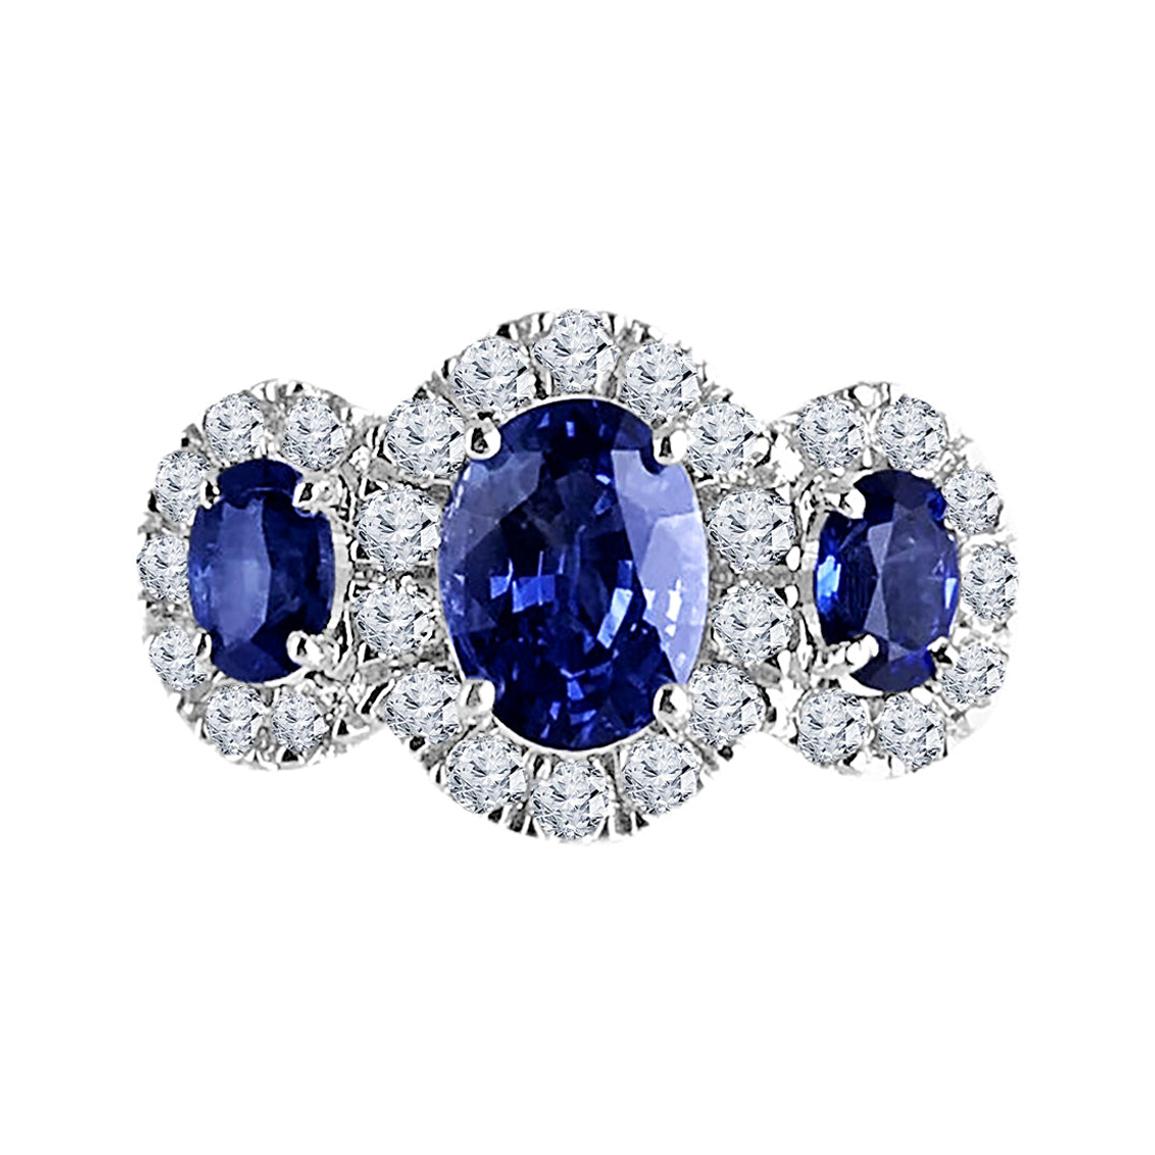 This ring is a true testament to elegance and sophistication. Crafted to perfection, it features not just one, but three stunning oval-cut sapphires totaling 2.45 carats. Each sapphire is beautifully ensconced within its own halo of dazzling round